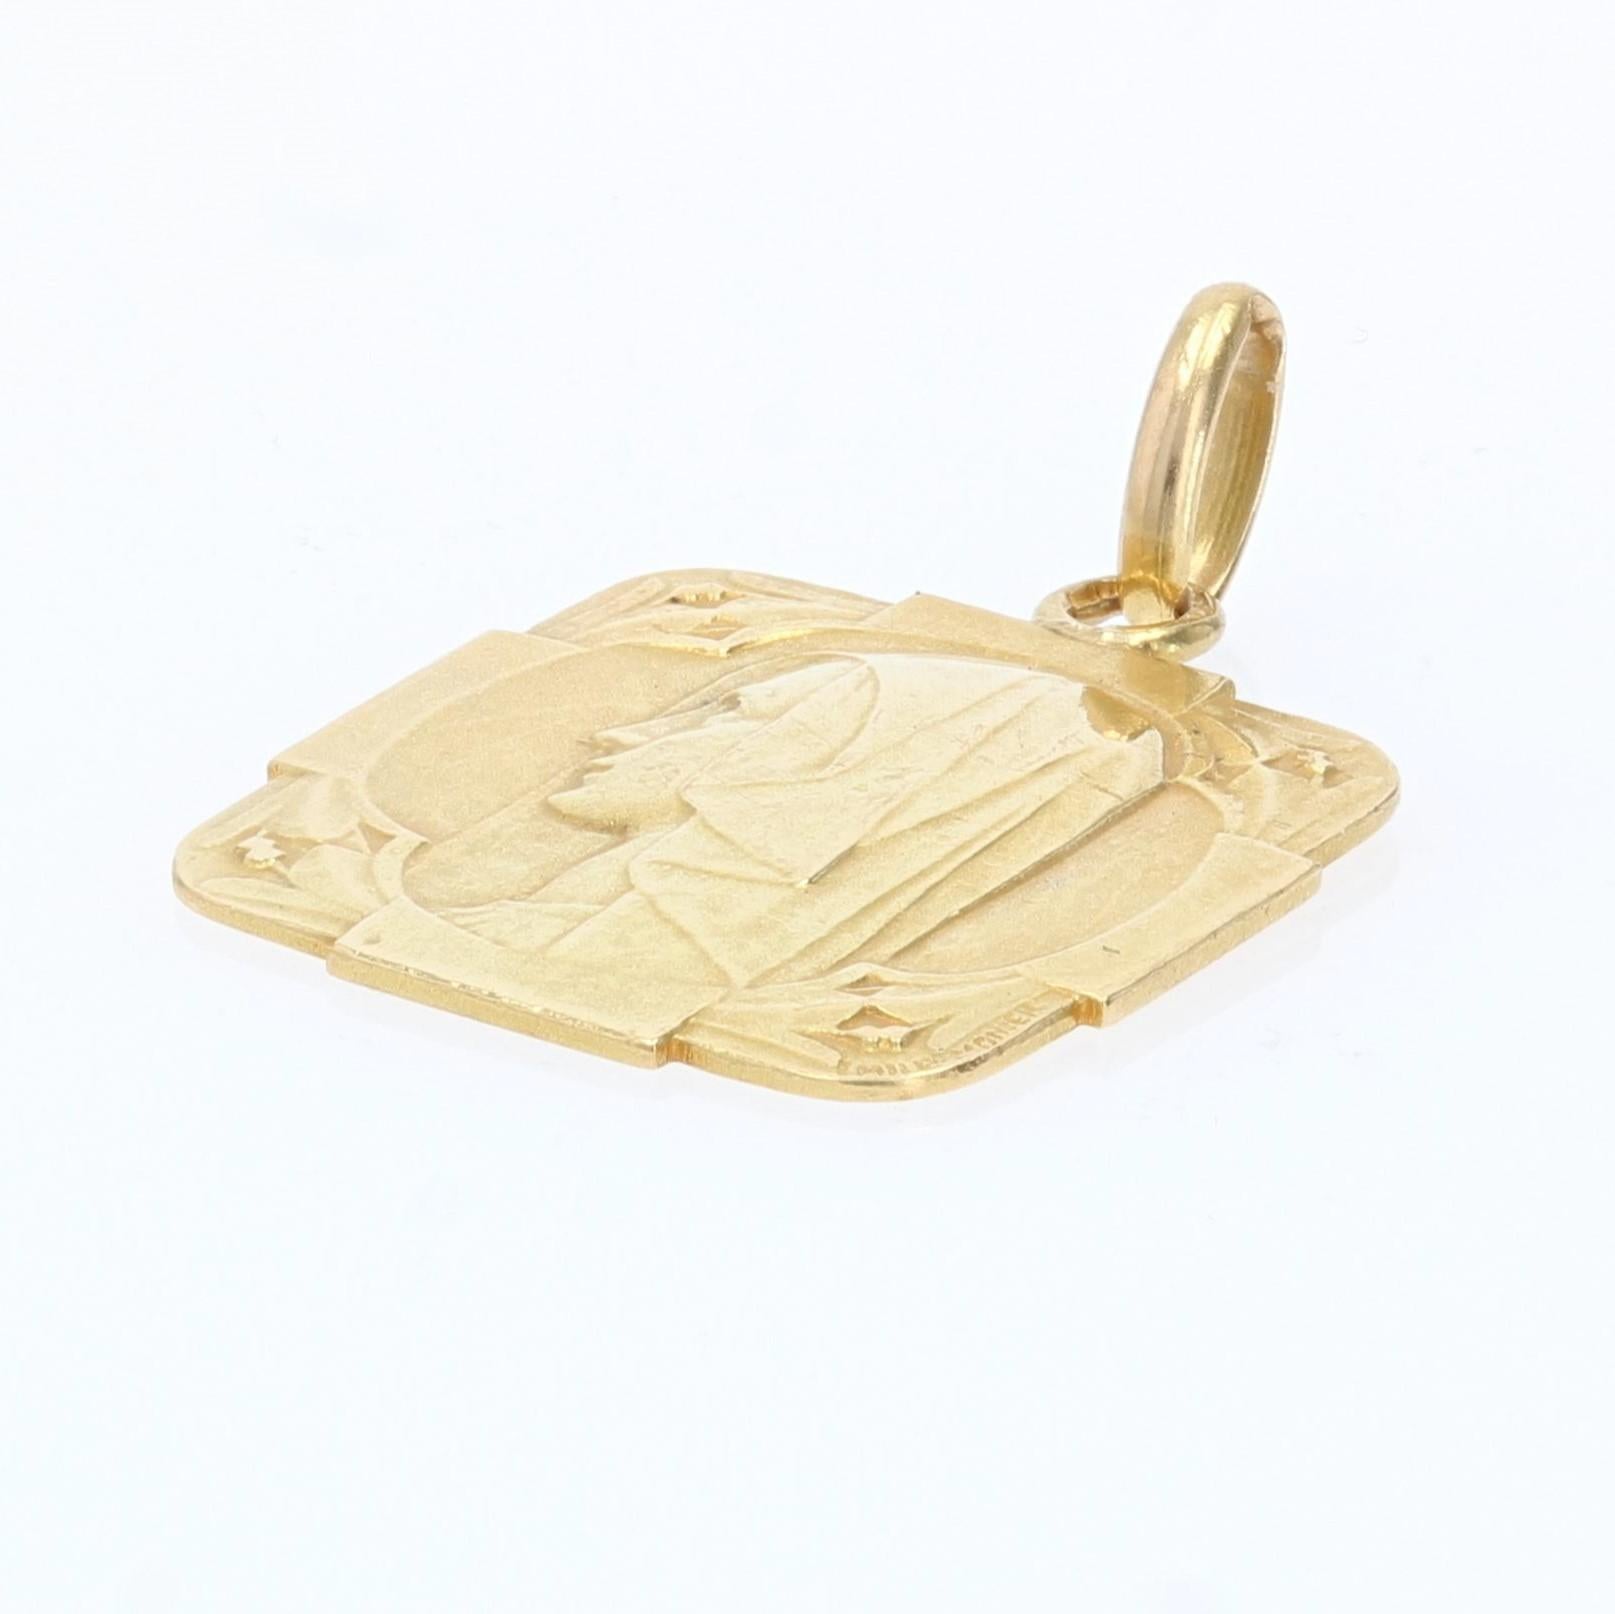 Medal in 18 karat yellow gold, eagle head hallmark.
This medal of square shape represents the profile of the Virgin. The angles are decorated with floral patterns. This religious pendant is signed Emile Monier, on the back is inscribed 